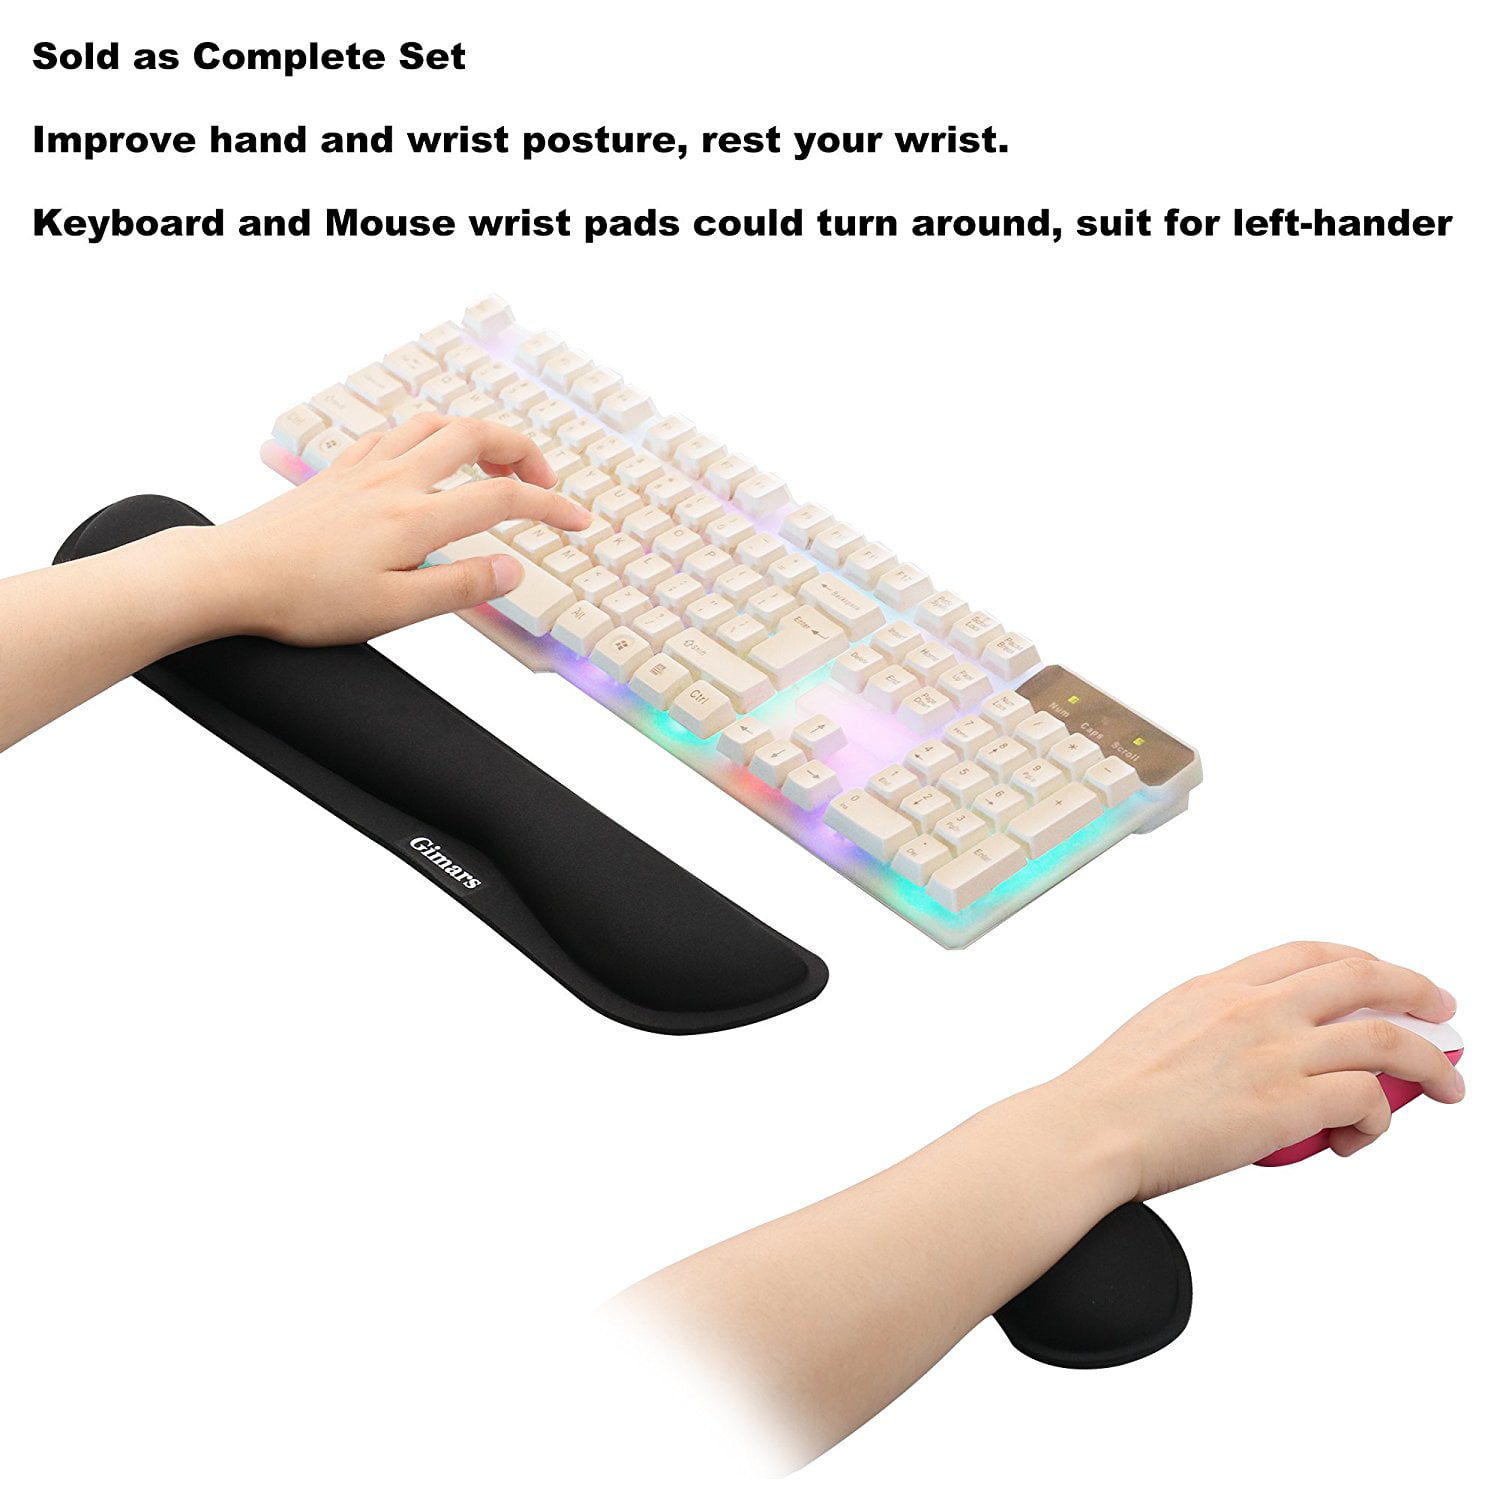 Laptop Computer Gimars Upgrade Enlarge Gel Memory Foam Set Keyboard Wrist Rest Pad Mac Comfortable Lightweight for Easy Typing Pain Relief,Marbling Mouse Wrist Cushion Support for Office 